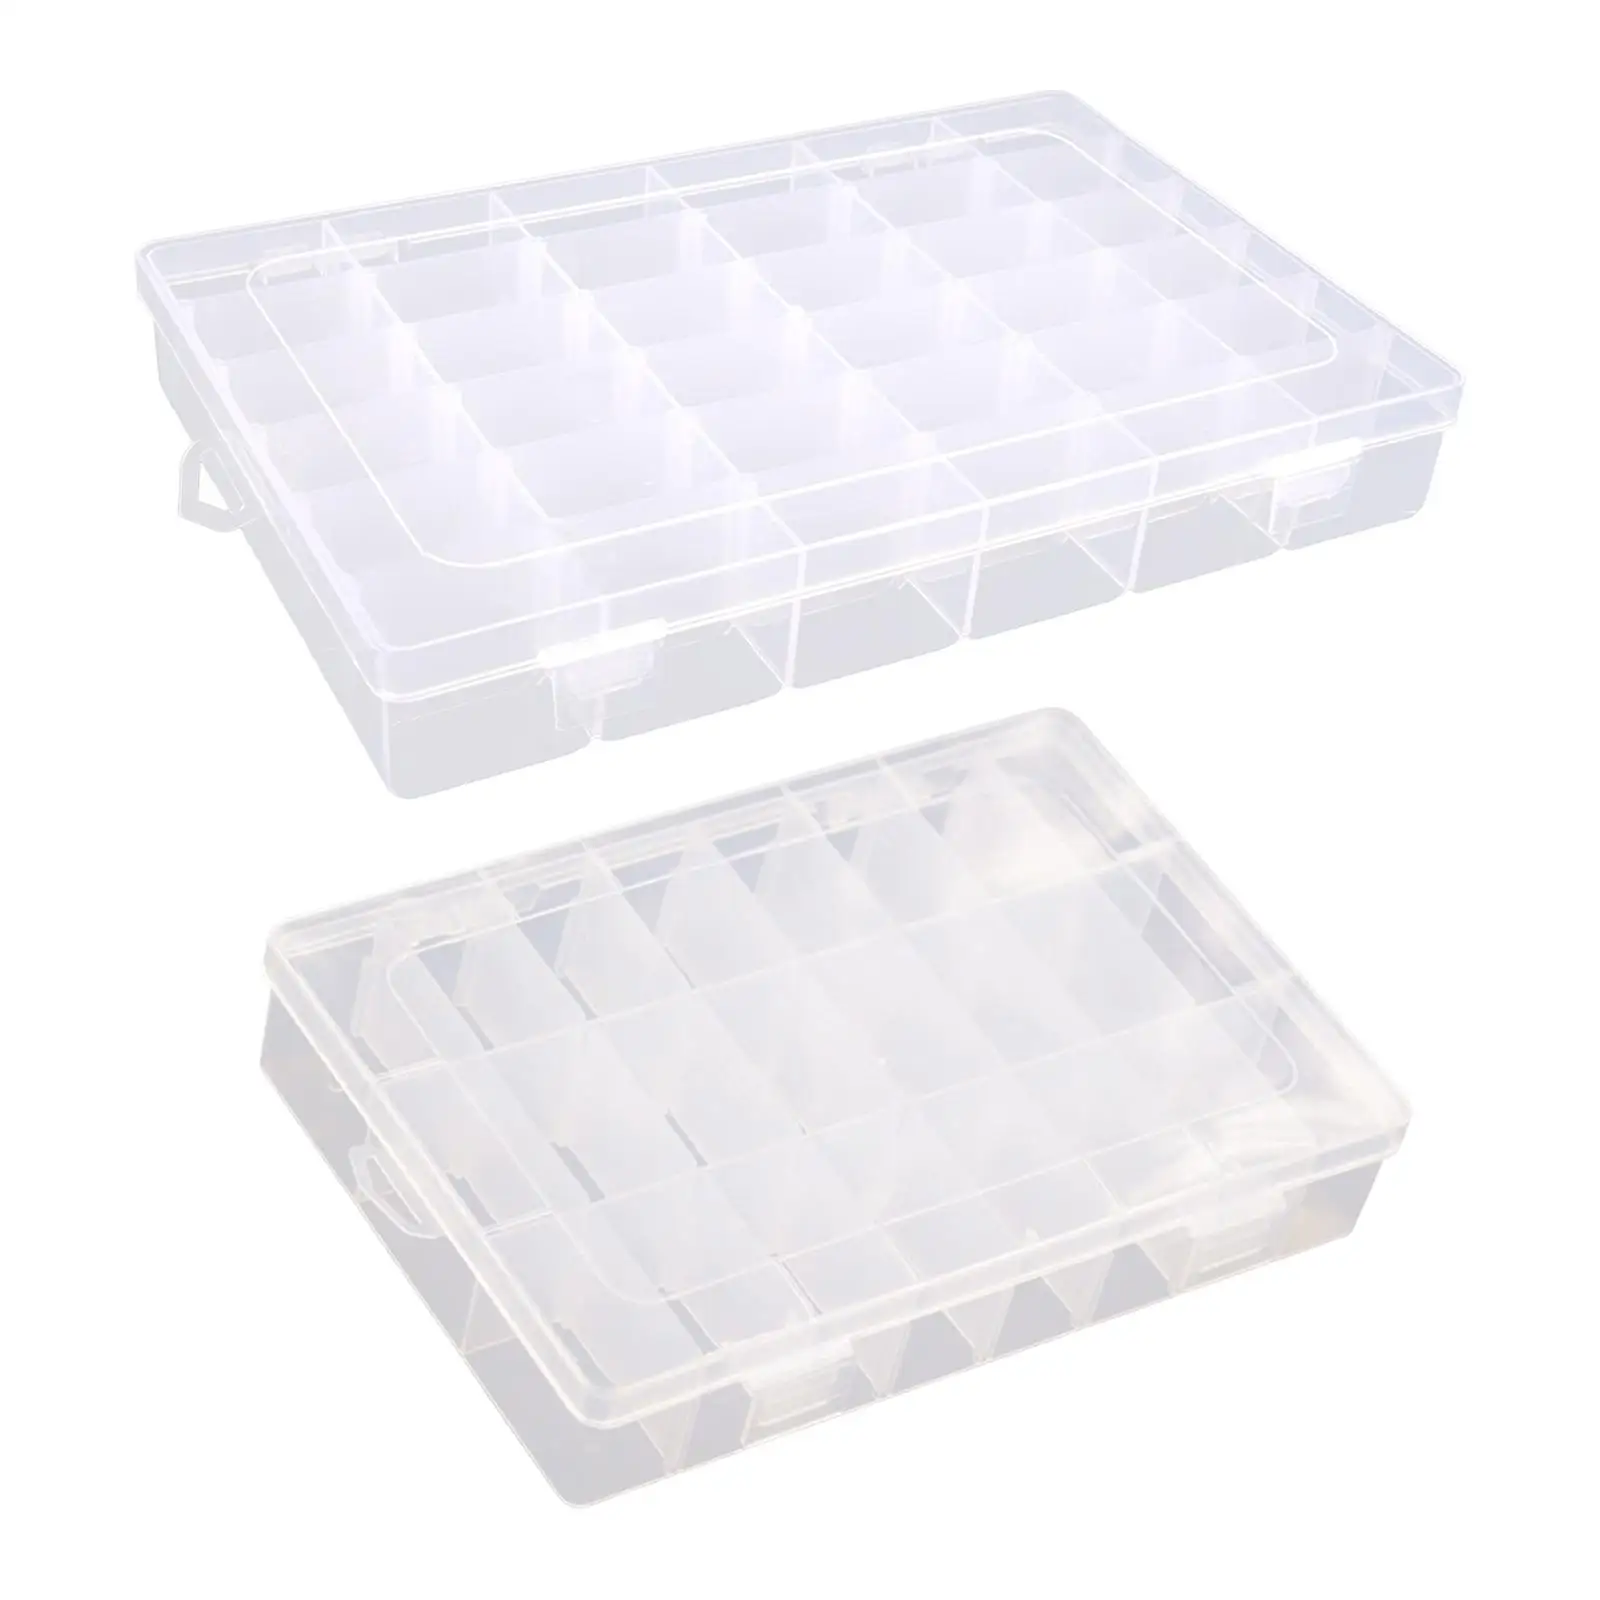 Sewing Thread Storage Box Organizer Embroidery Grids Sewing Thread Holder for Fishing Tackles Jewelry Embroidery Threads Beads